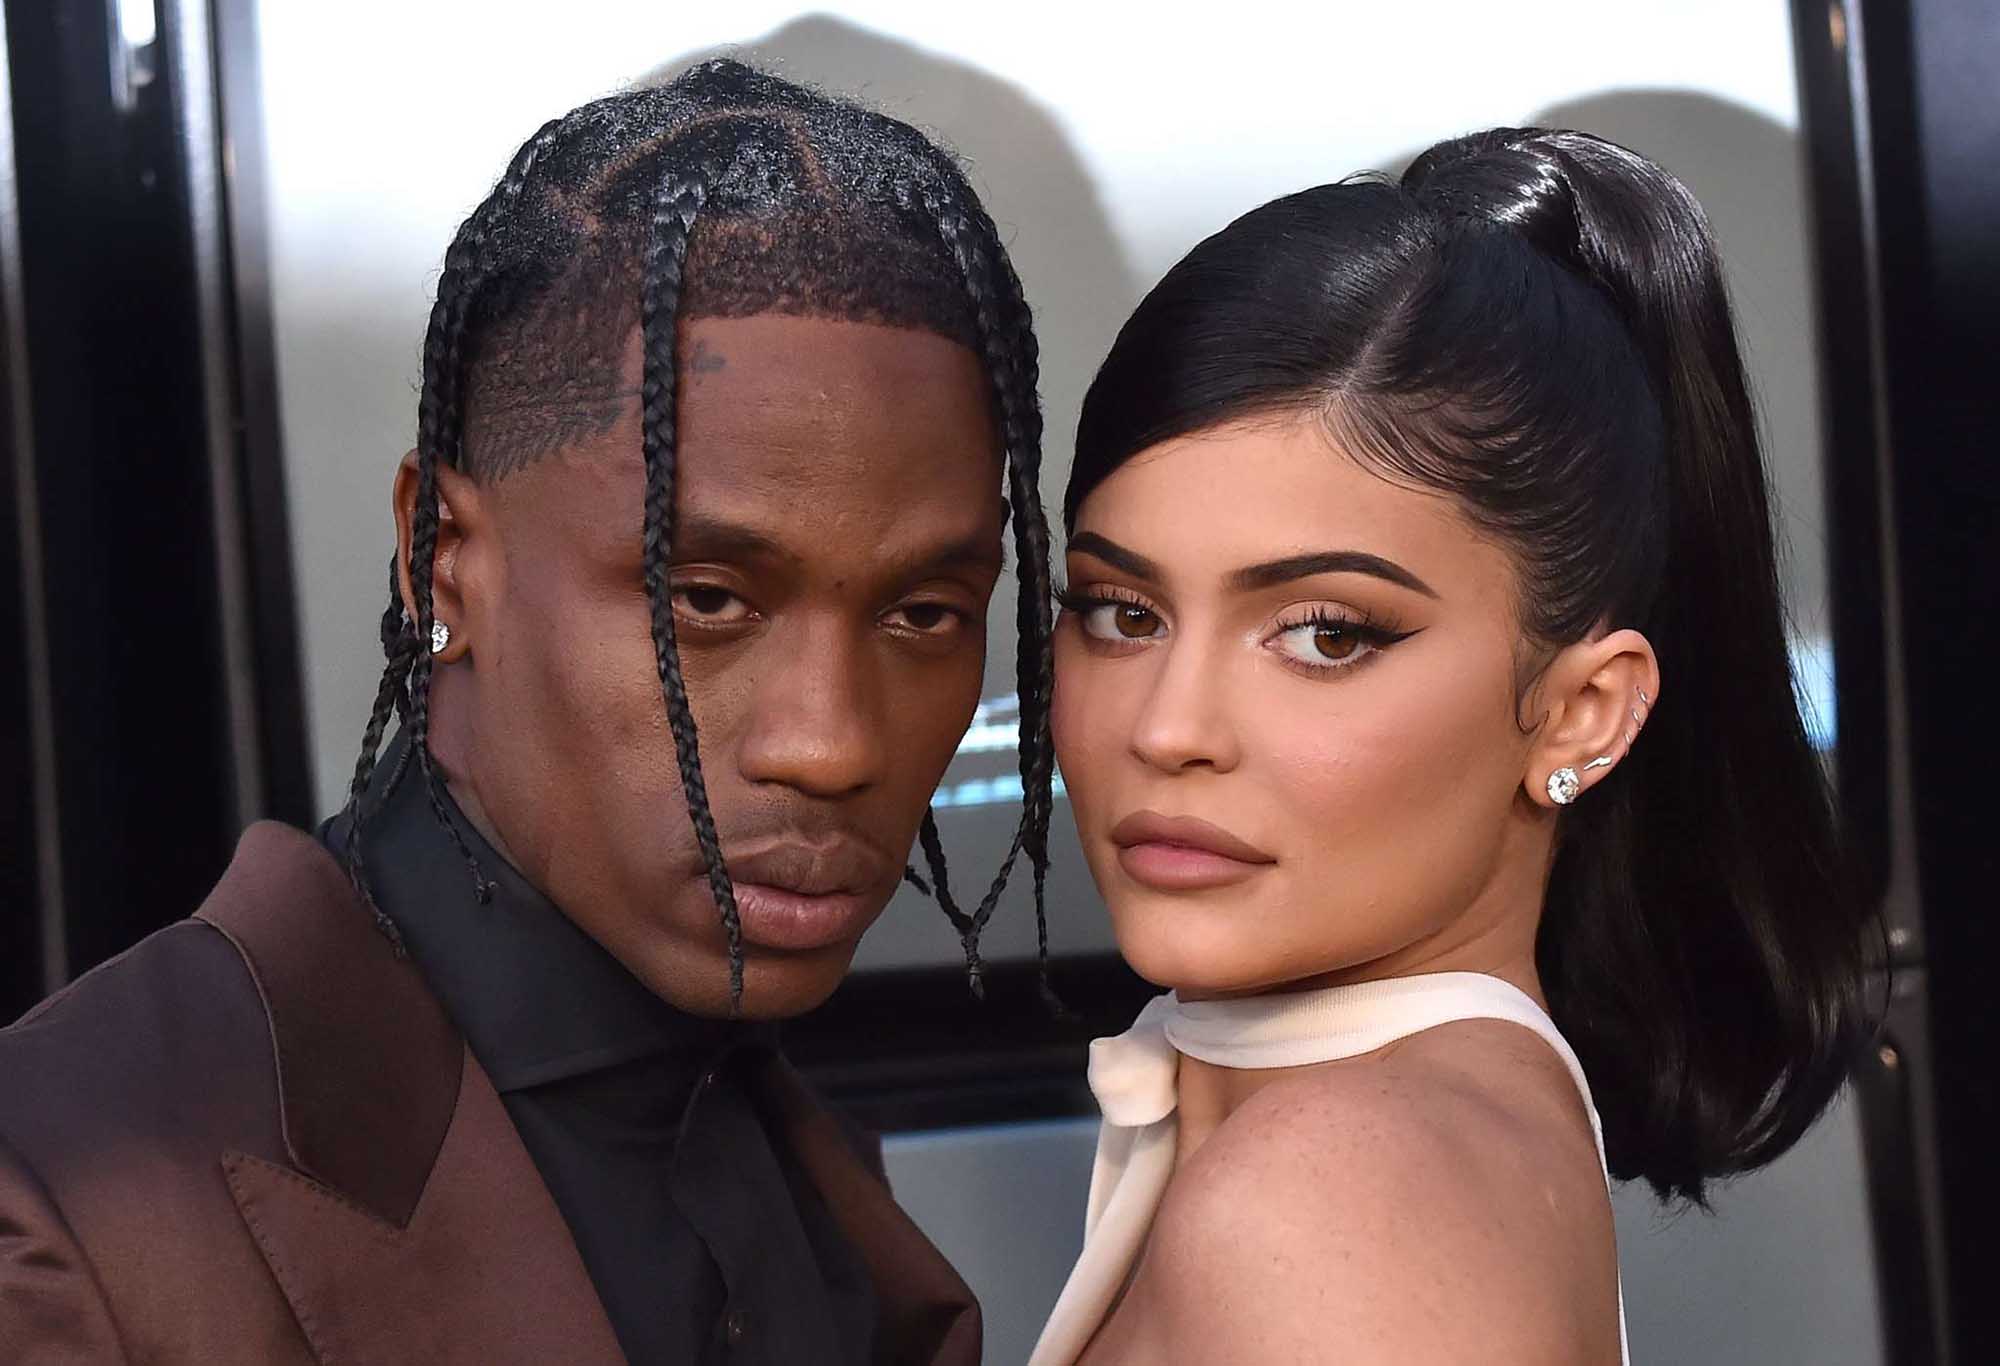 Travis Scott and Kylie Jenner have reconciled and become a Hollywood power couple again. Get the tea on how Scott finally made up for his cheating scandal.